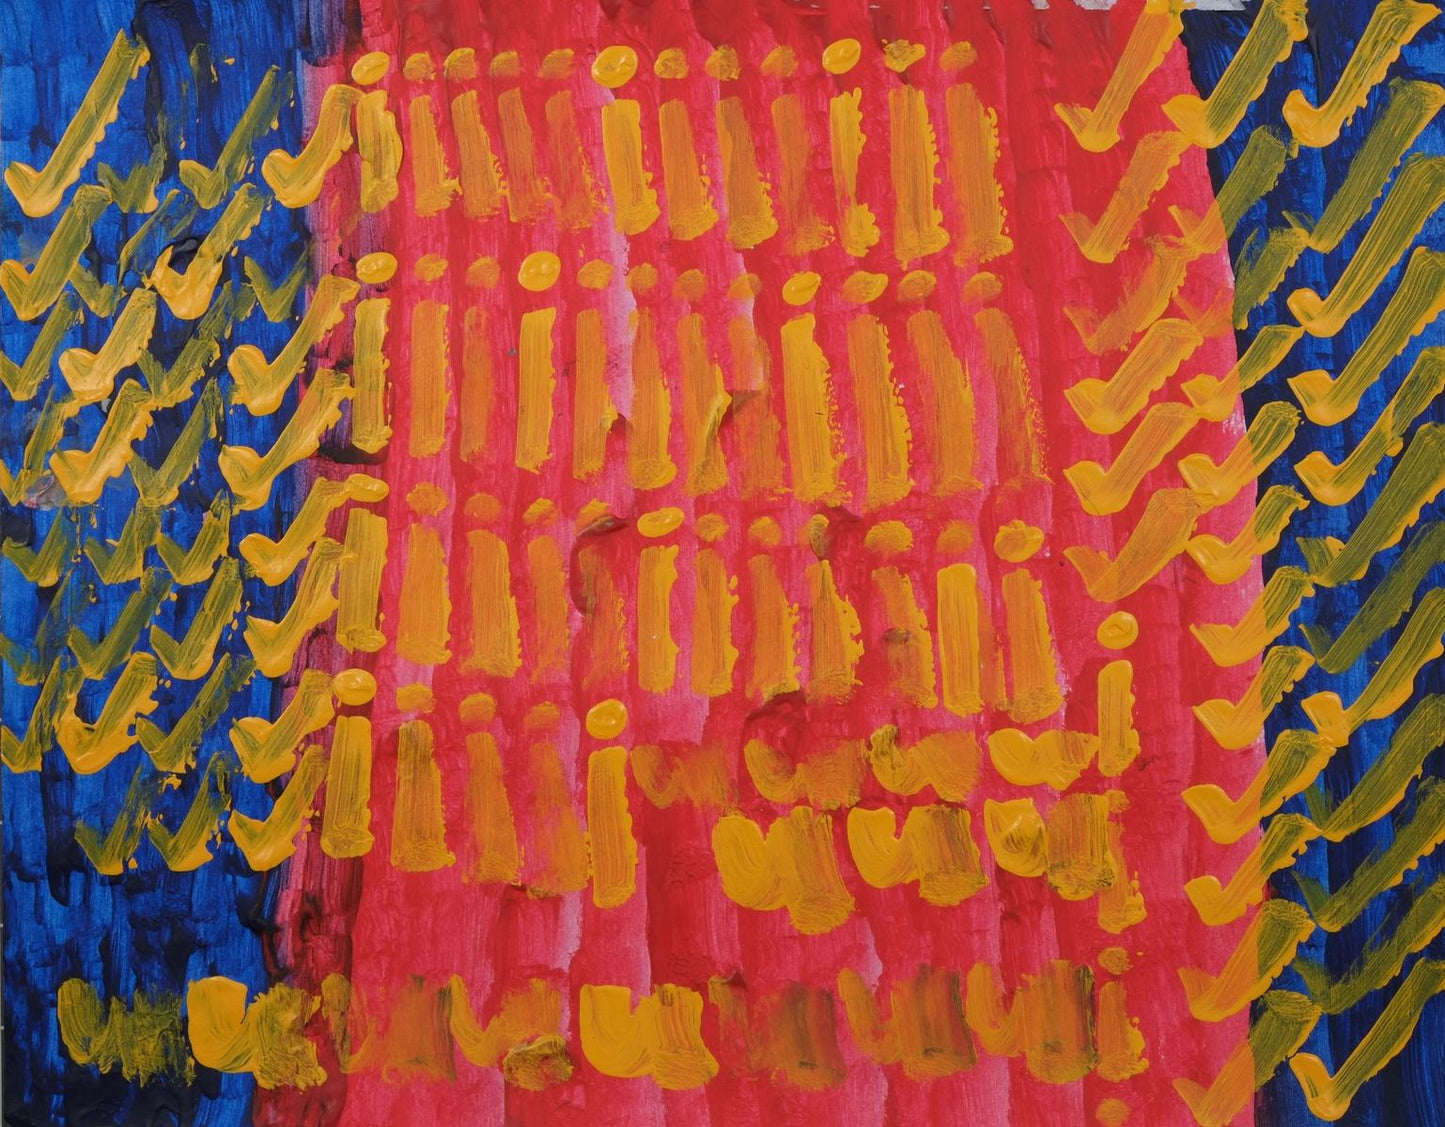 Acrylic on paper artwork with vertical lines of yellow check marks and the letter i against a background of blue vertical lines on the right and left with a large red vertical stripe down the middle